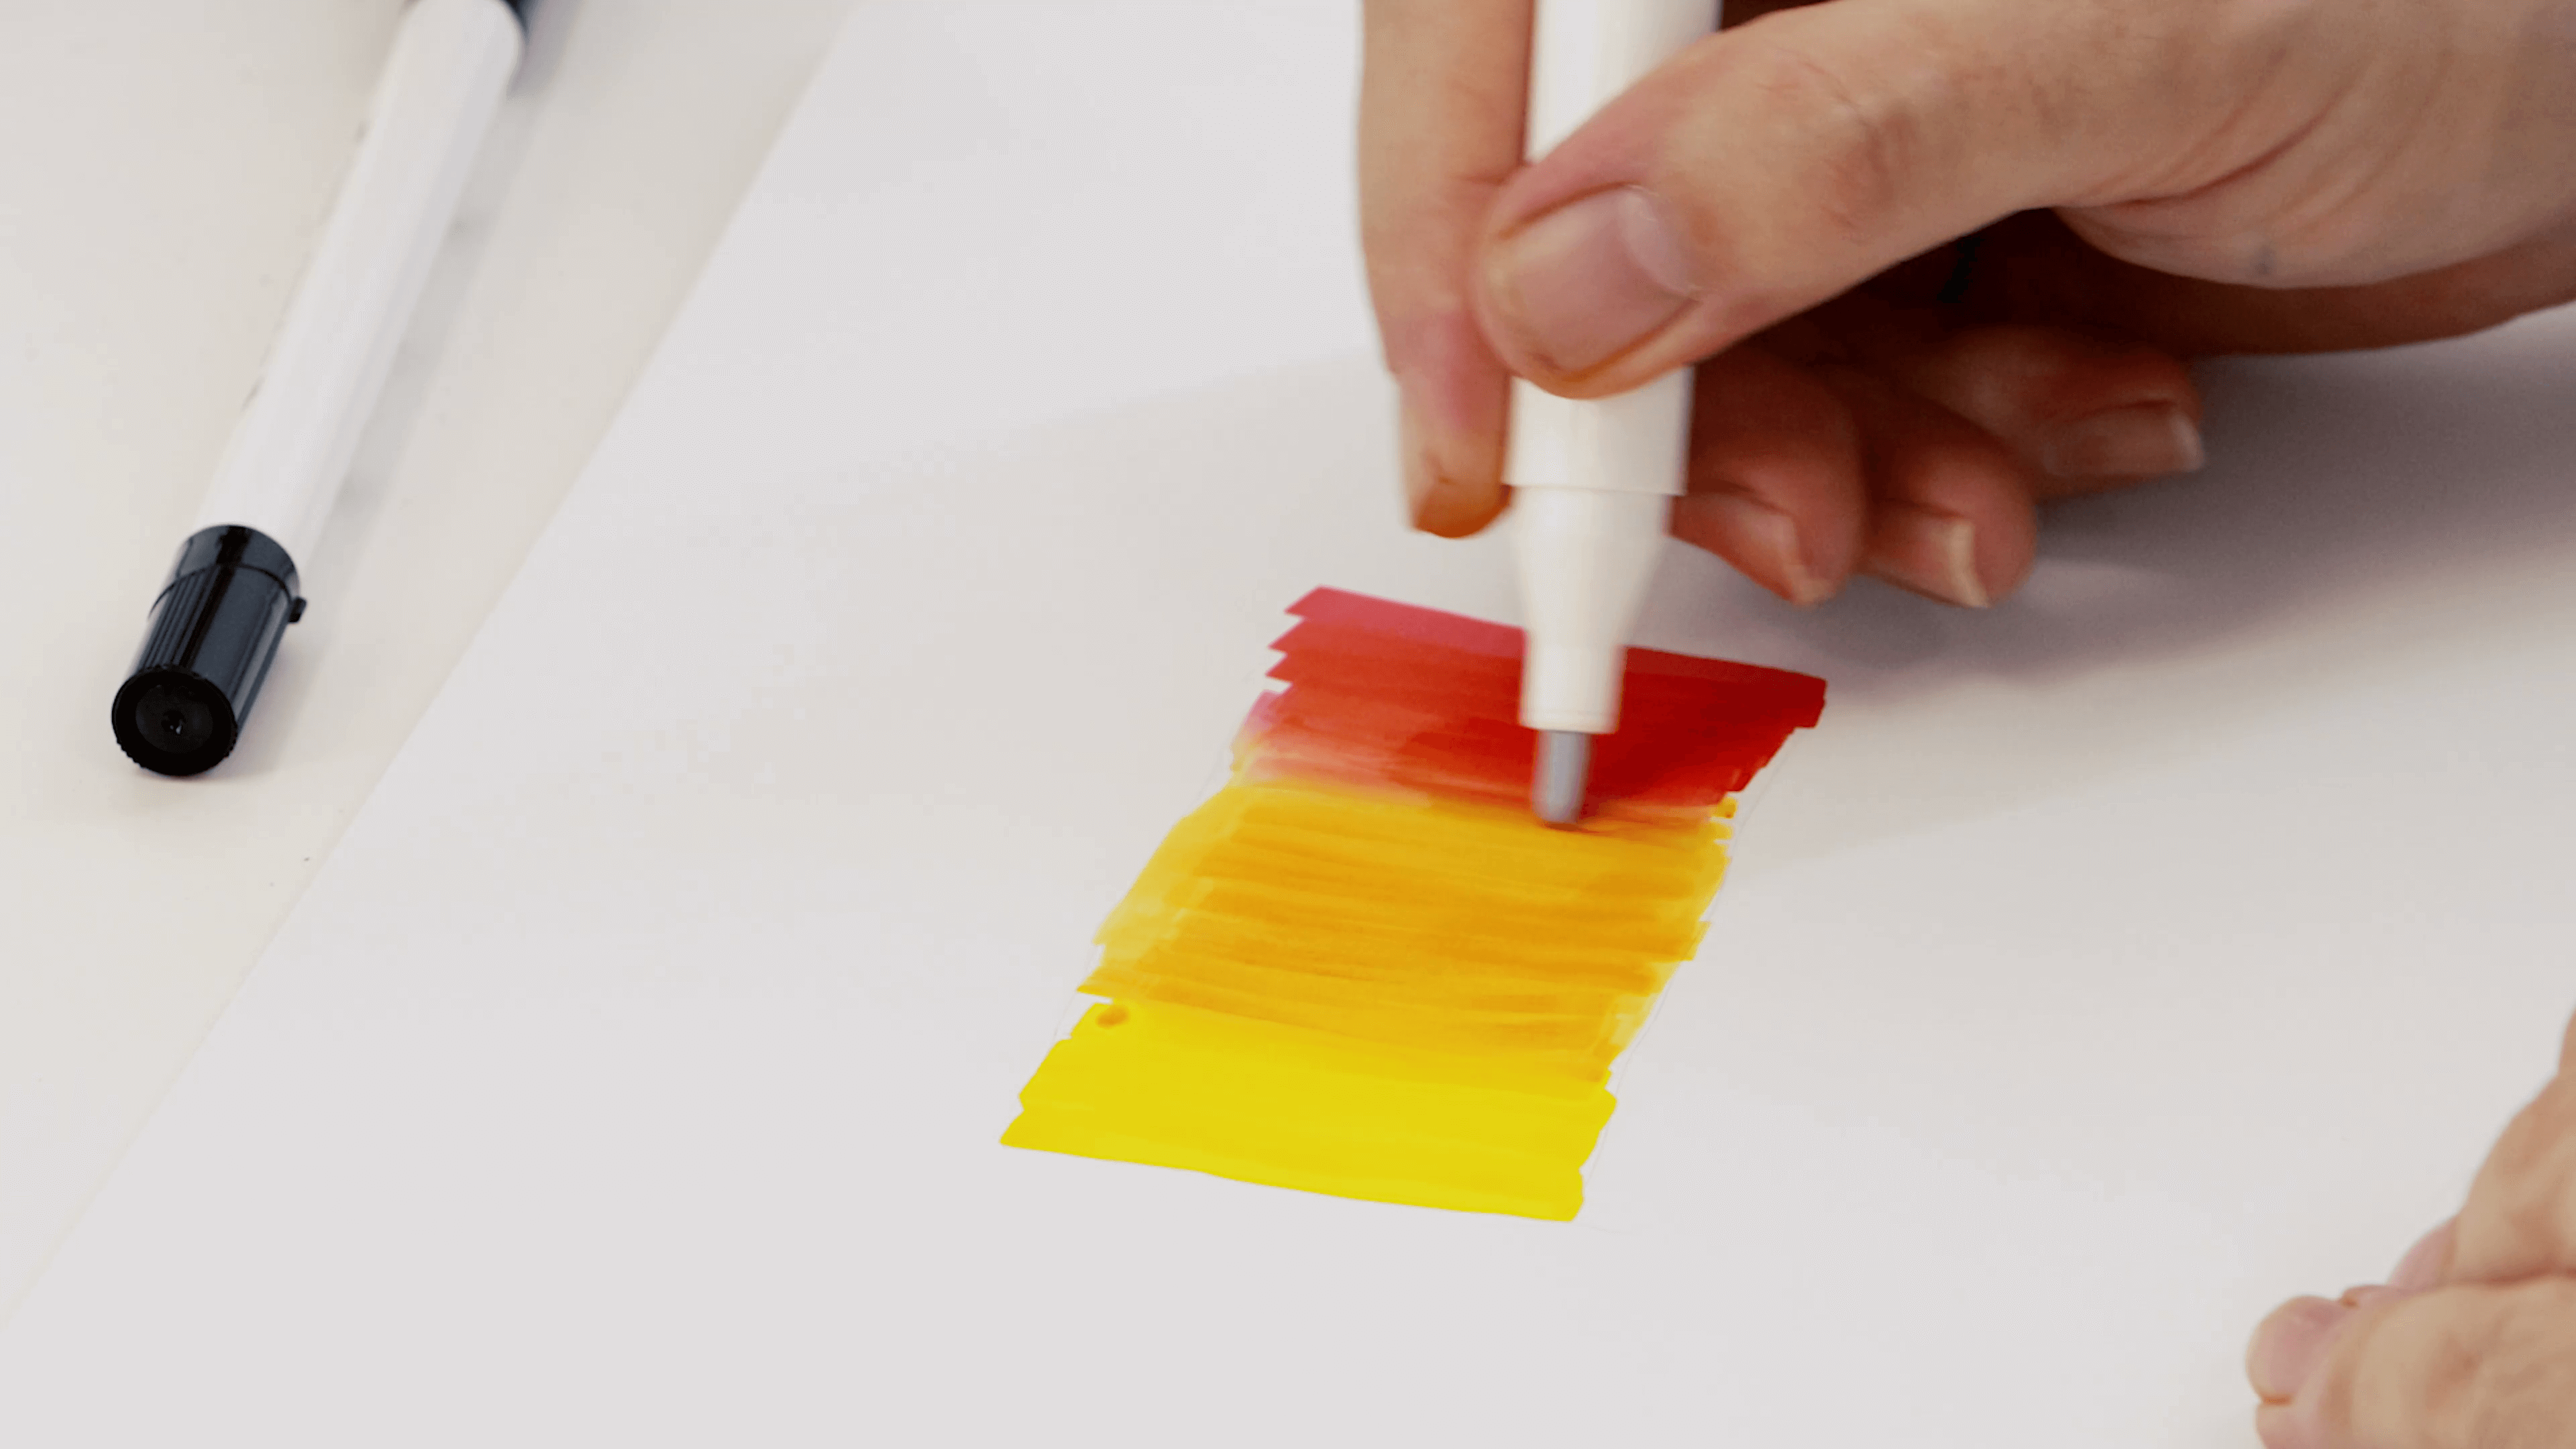 Hand blending an alcohol marker to create a red, orange and yellow gradient.